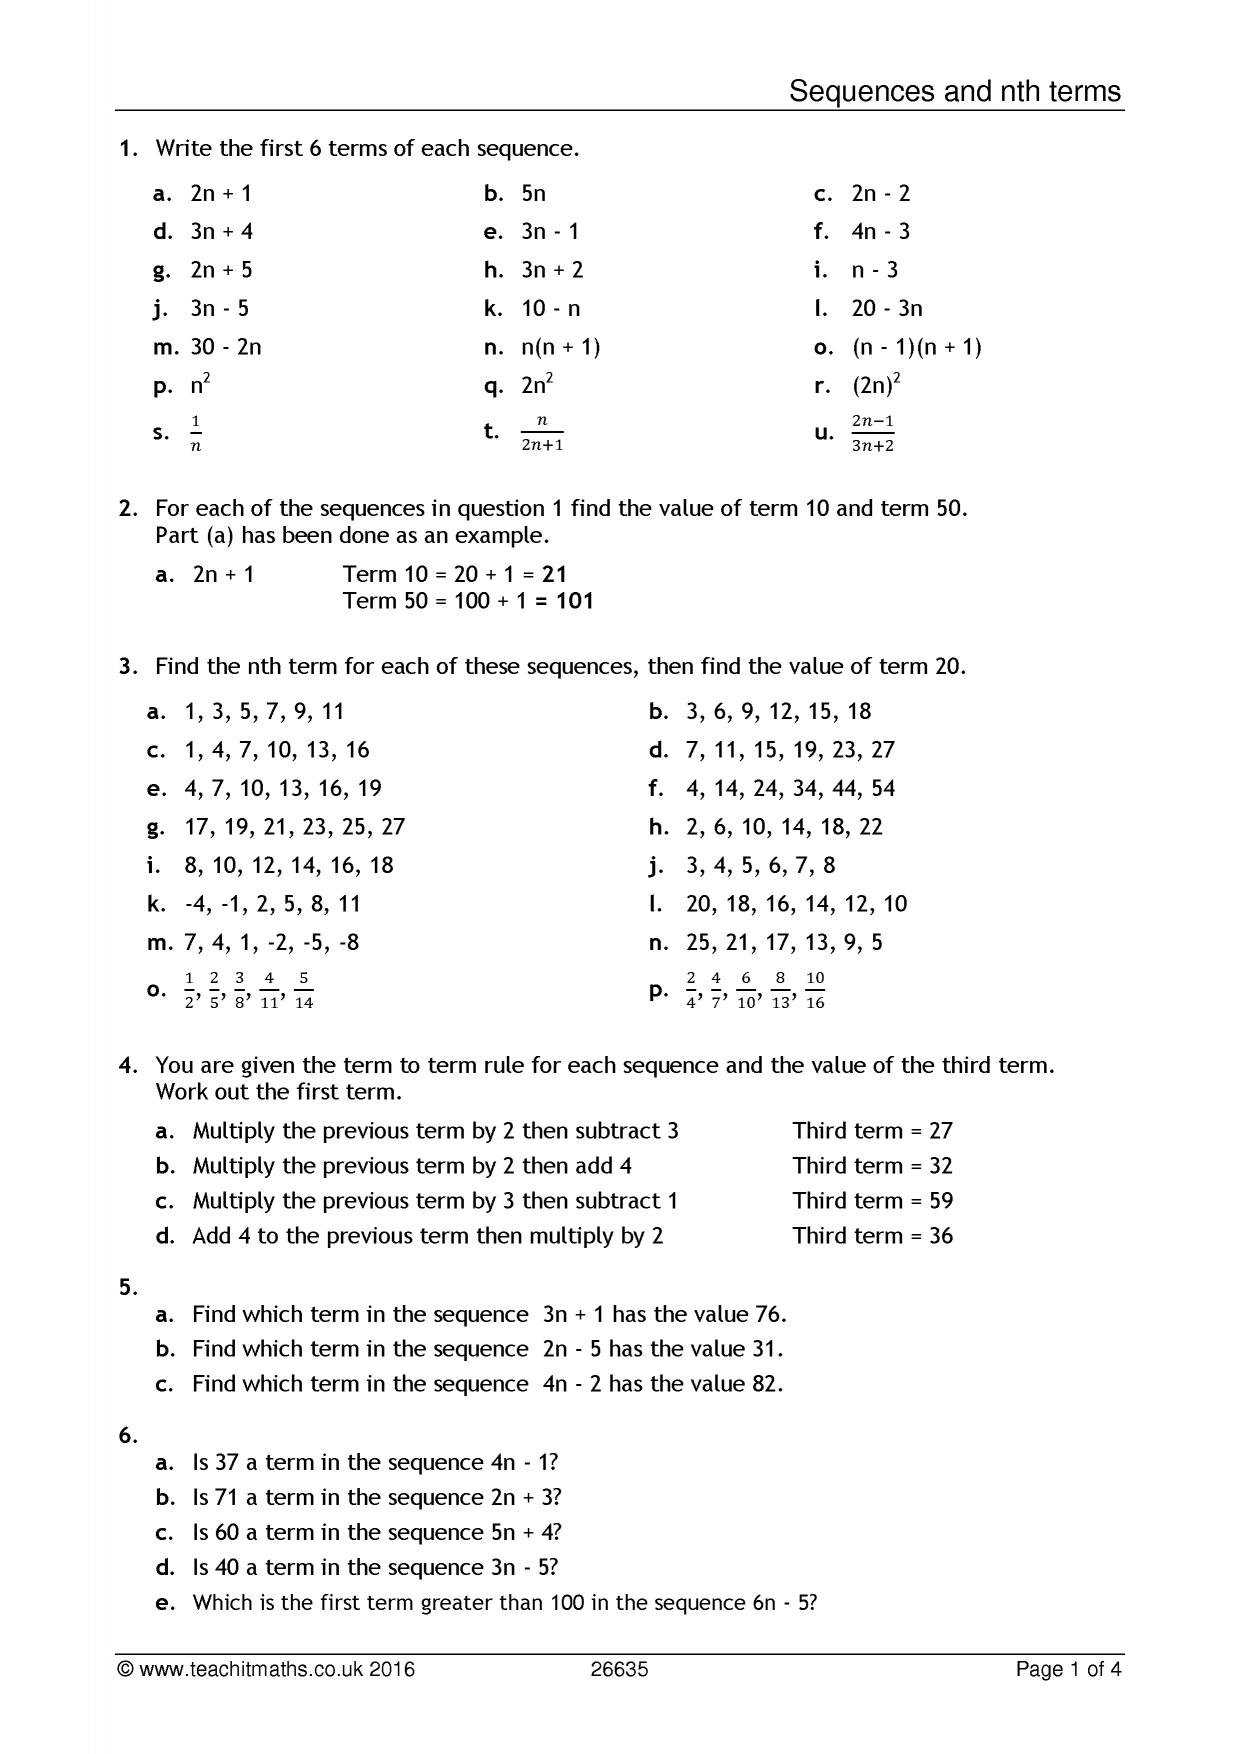 Sequences And Nth Terms Worksheet Pdf  Teachit Maths Together With Arithmetic Sequence Worksheet Algebra 1